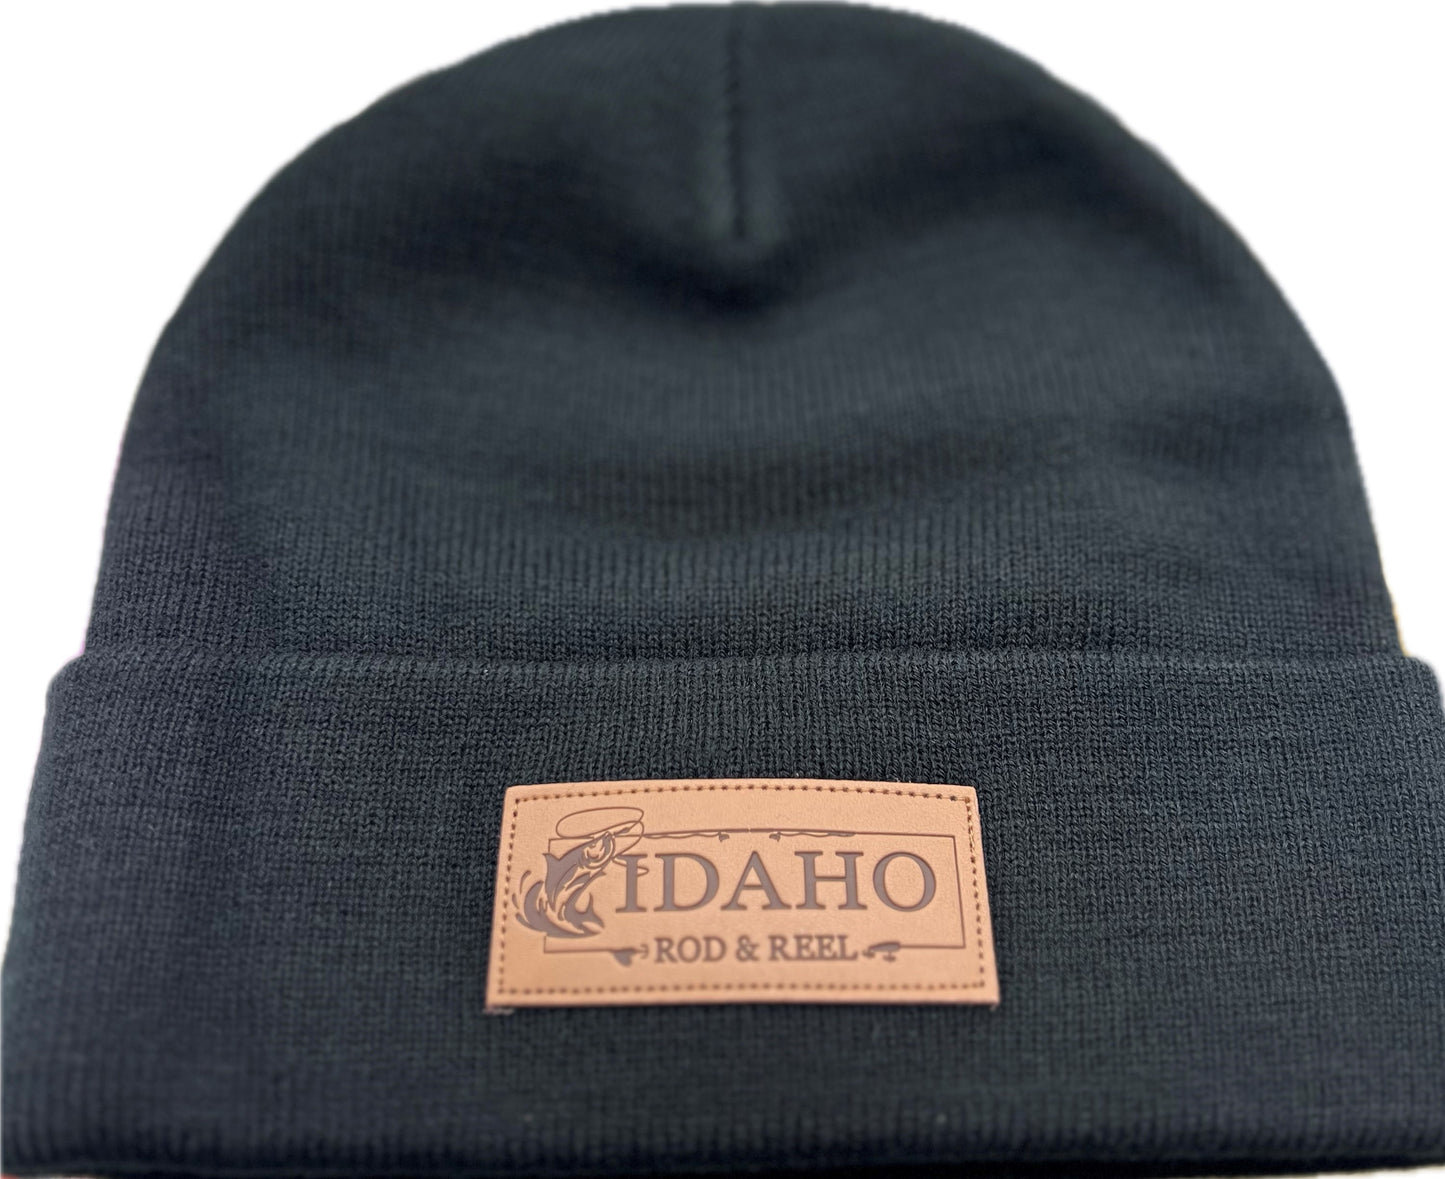 Idaho Rod and Reel Beanie, Black and Leather